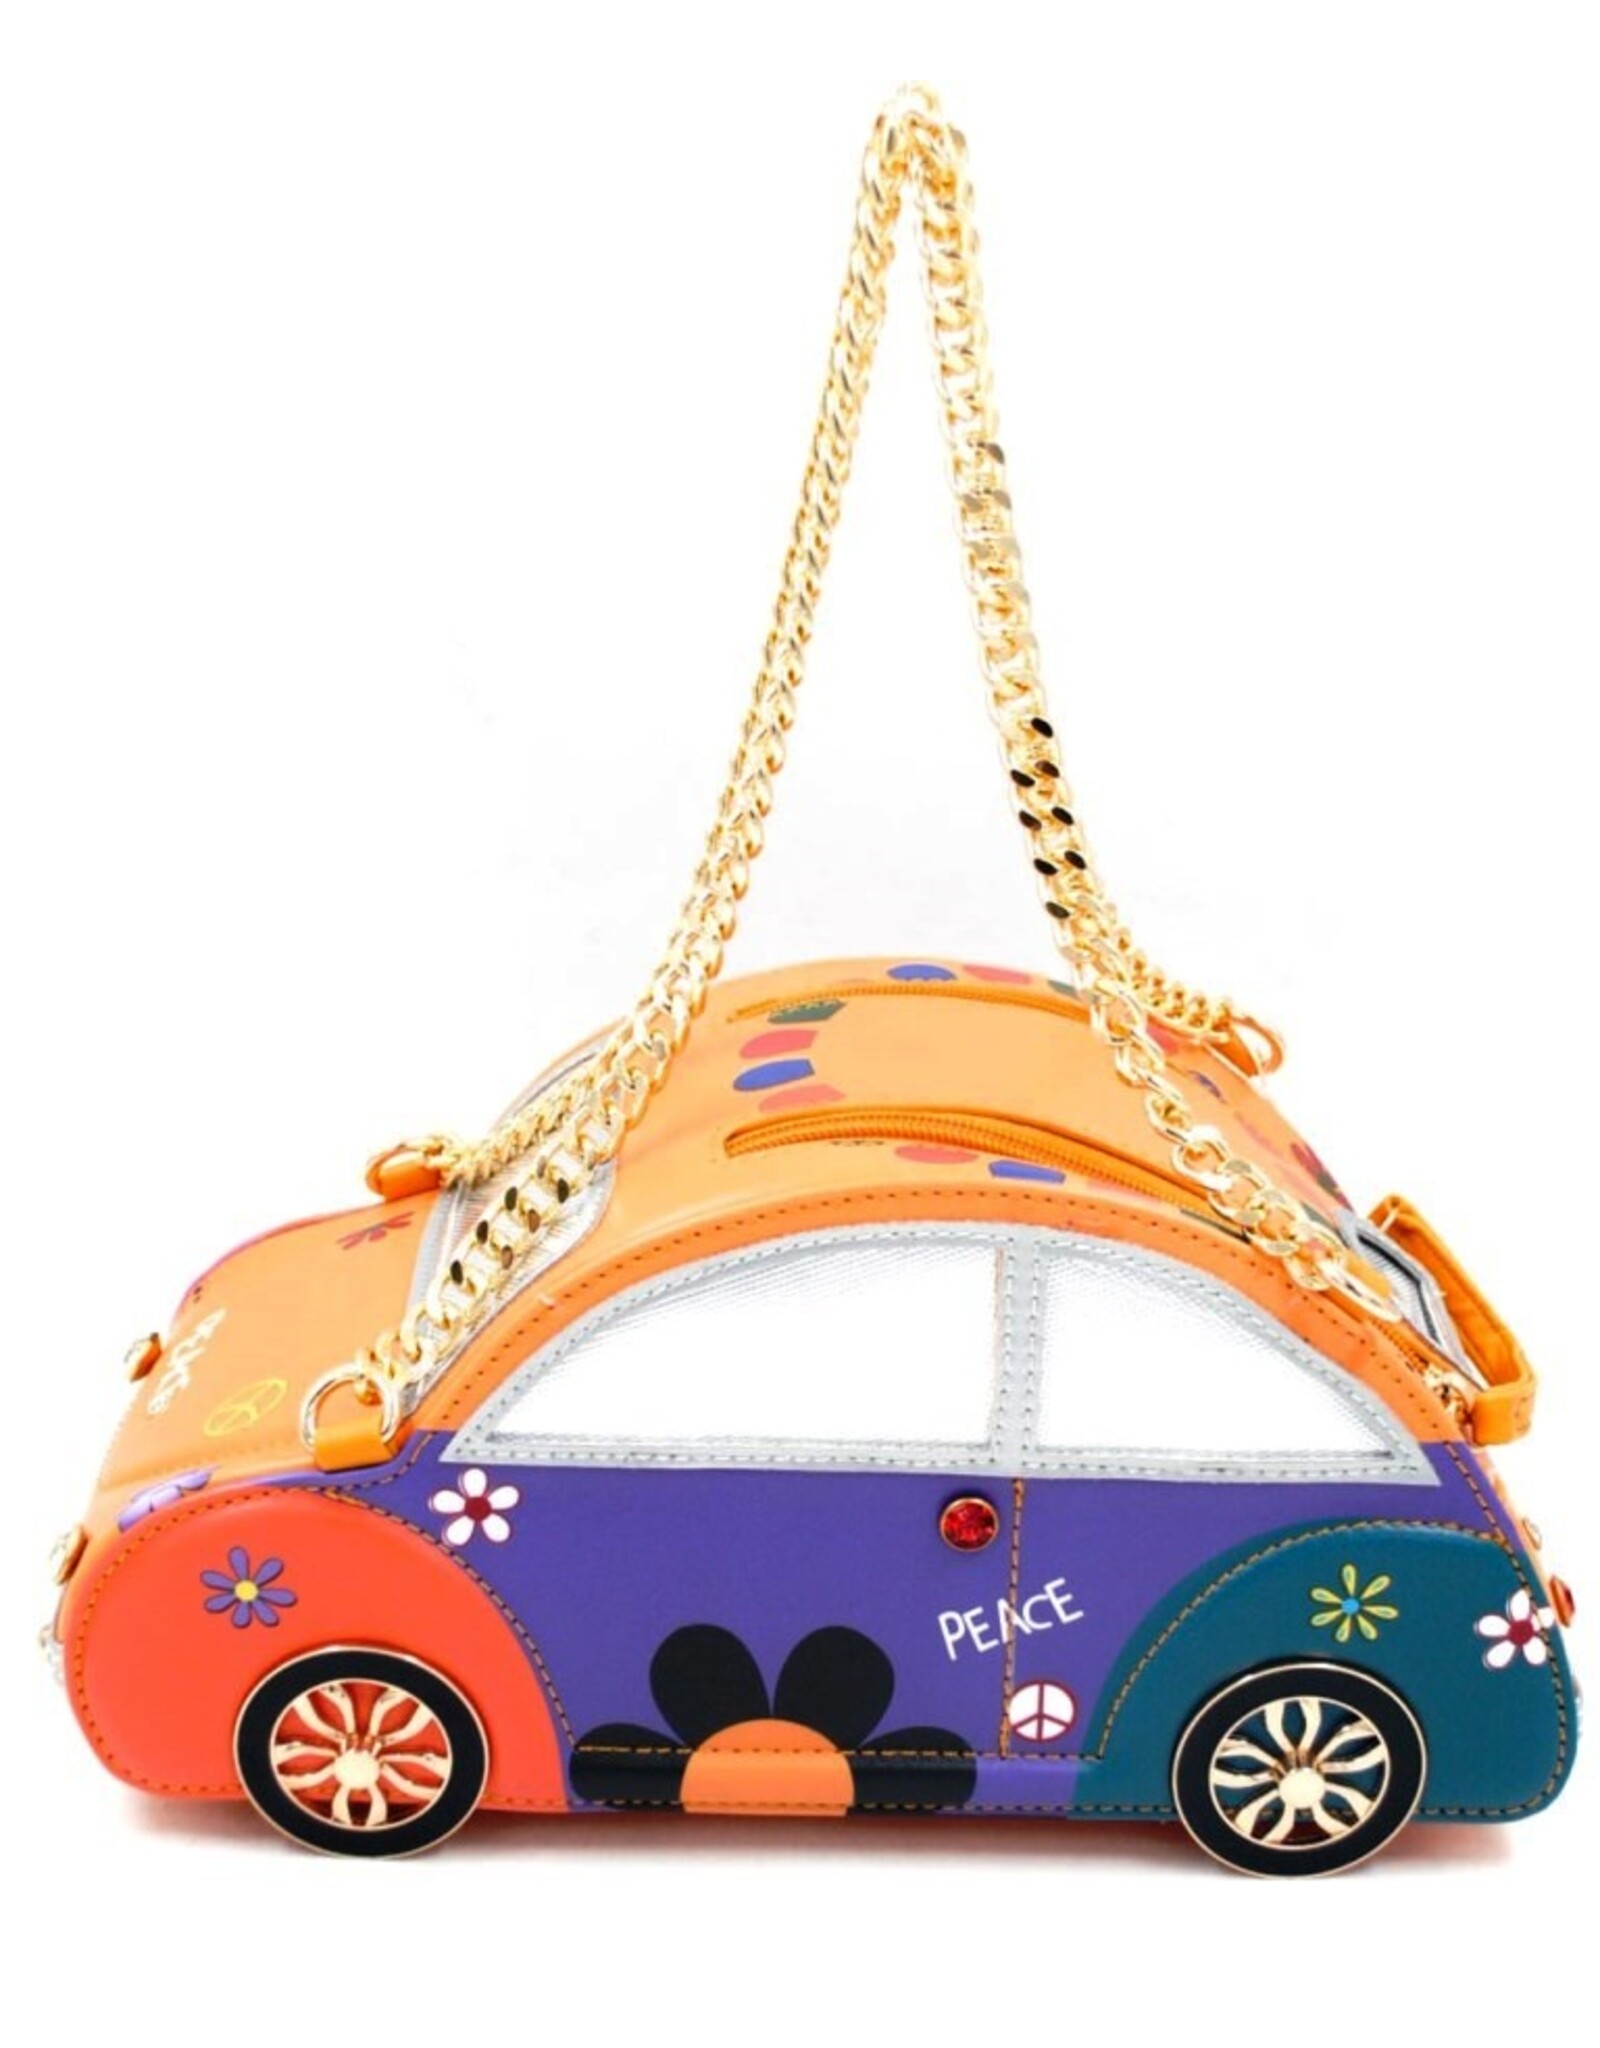 Systyle Fantasy bags and wallets - Handbag Vintage Car Flowerpower Peace&Love